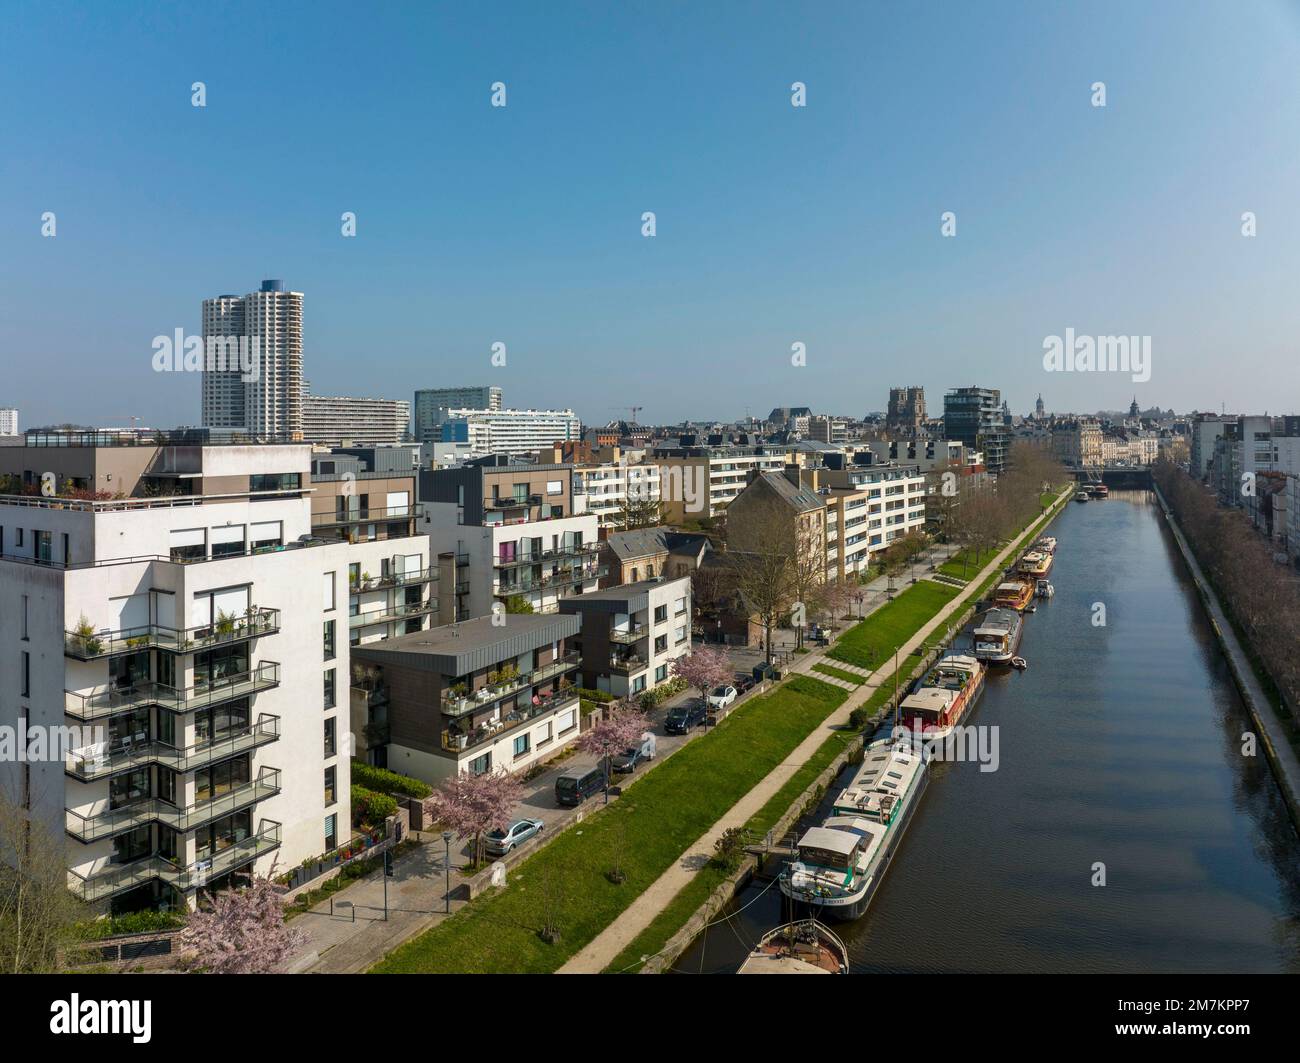 Rennes (Brittany, north-western France): aerial view of buildings along the River Vilaine, the avenue “mail Francois Mitterand” and buildings in the d Stock Photo